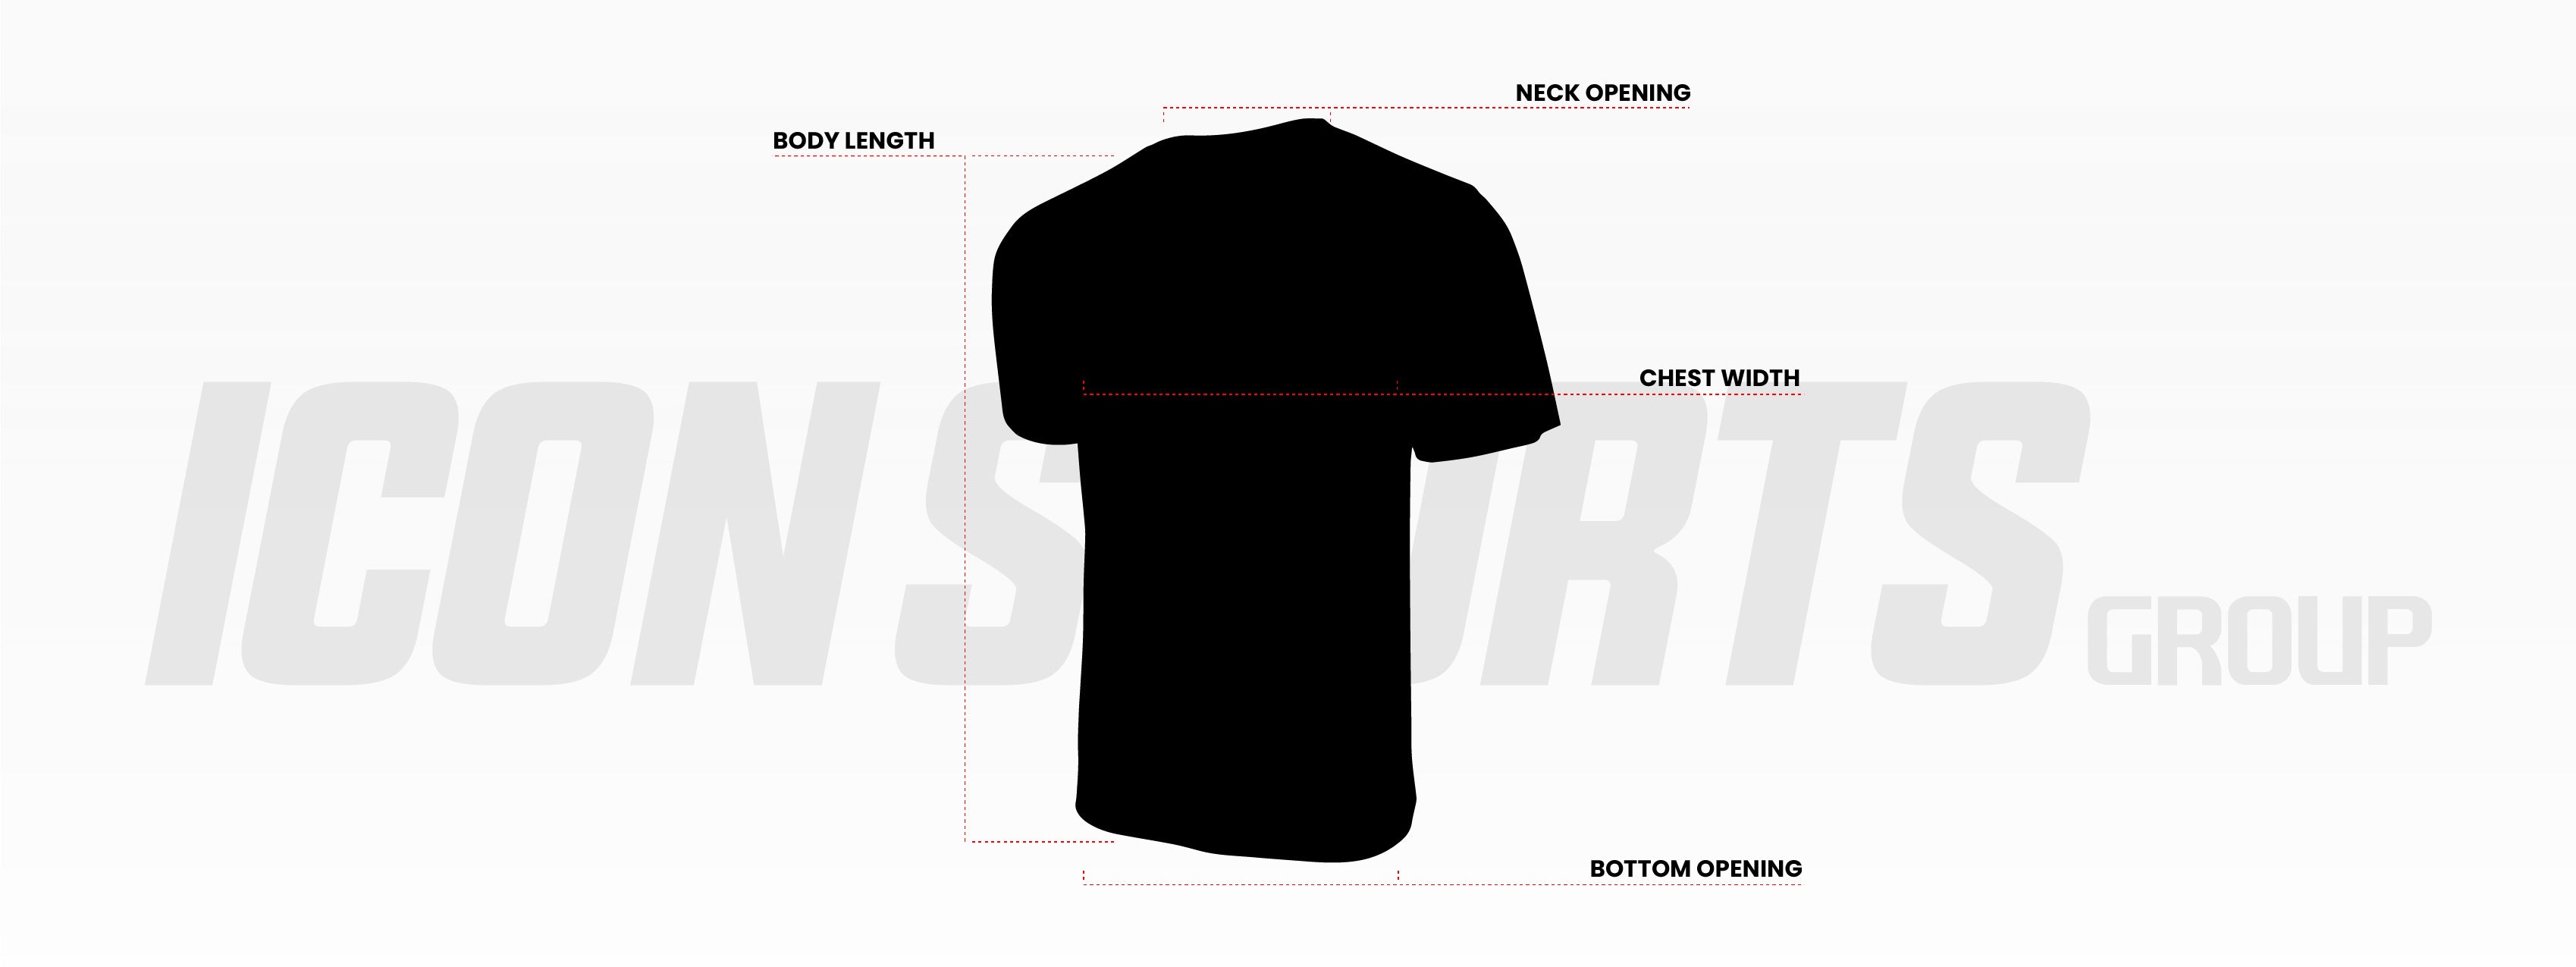 Youth T shirt size chart Icon Sports